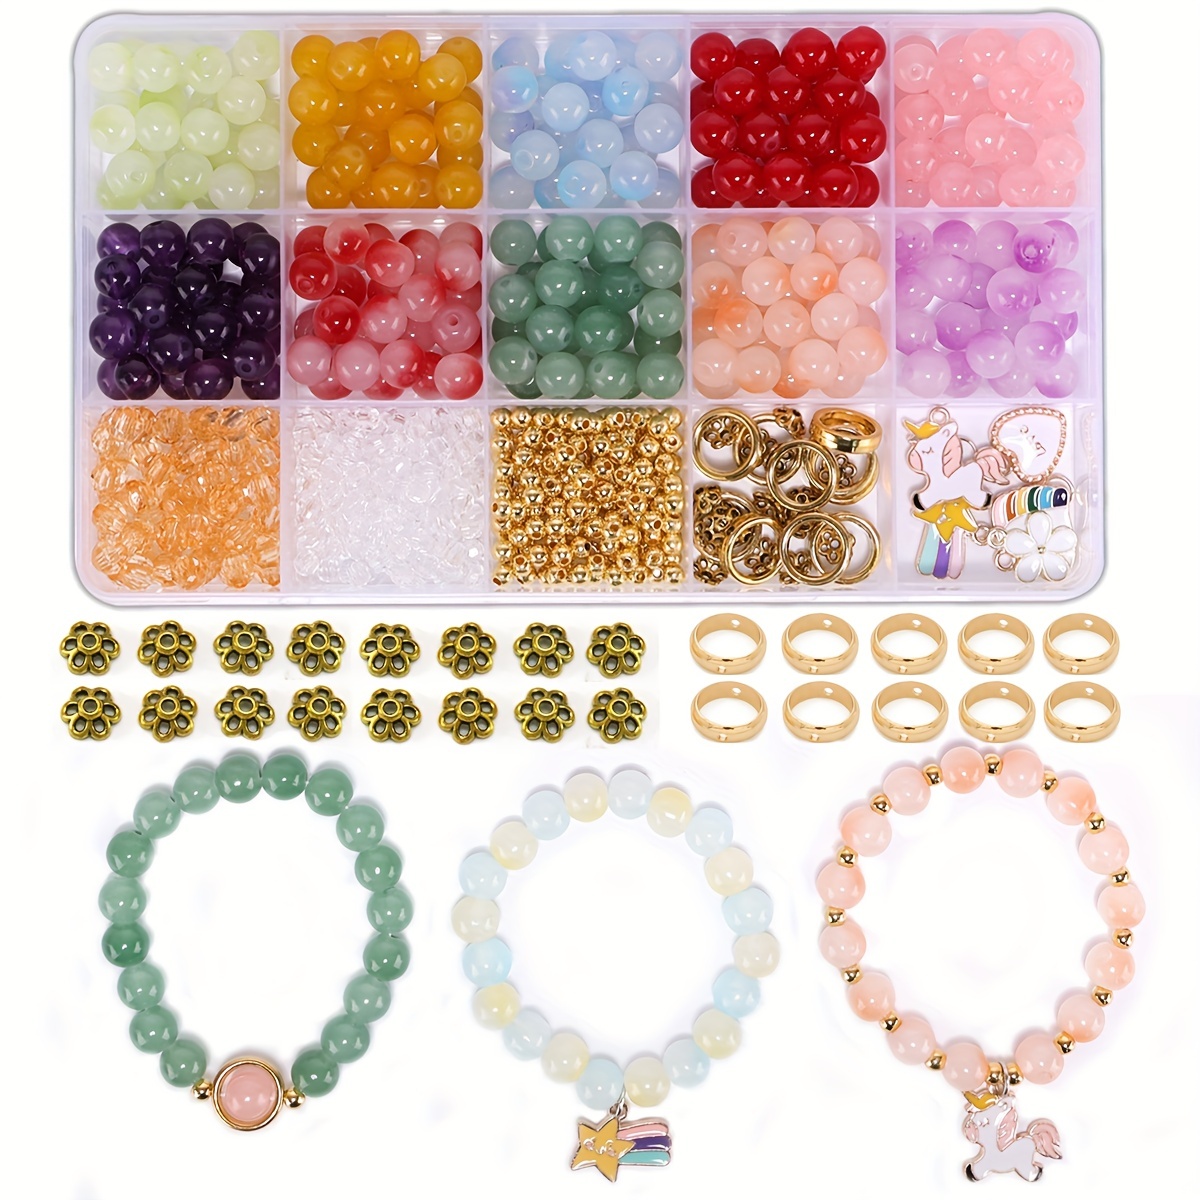 671Pcs Glass Beads Bracelet Making Kits 30 Colors 8Mm Crystal Beads for  Jewelry